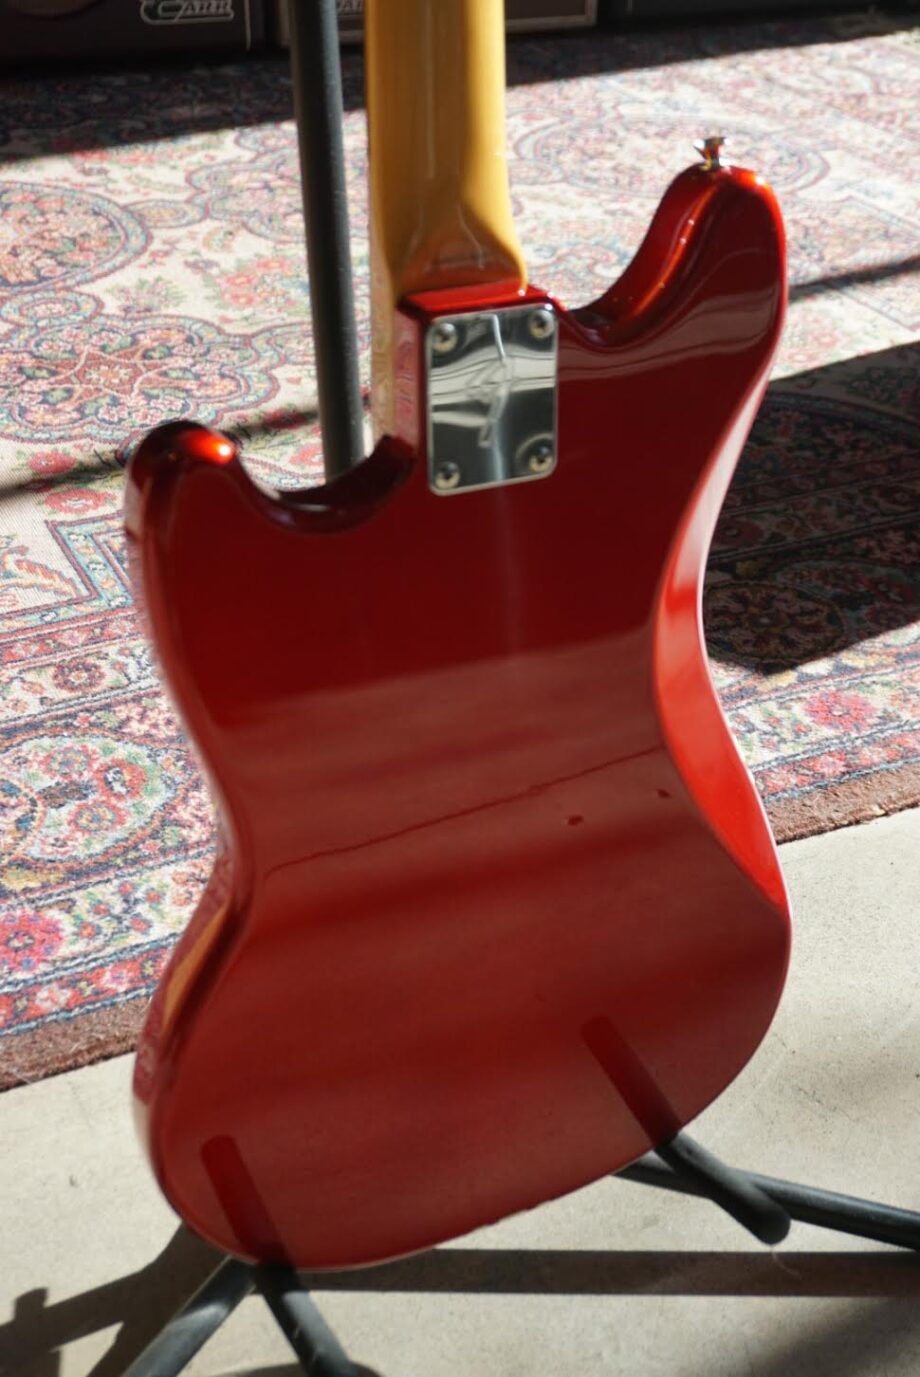 2002 Fender CIJ MG-73 Competition Mustang